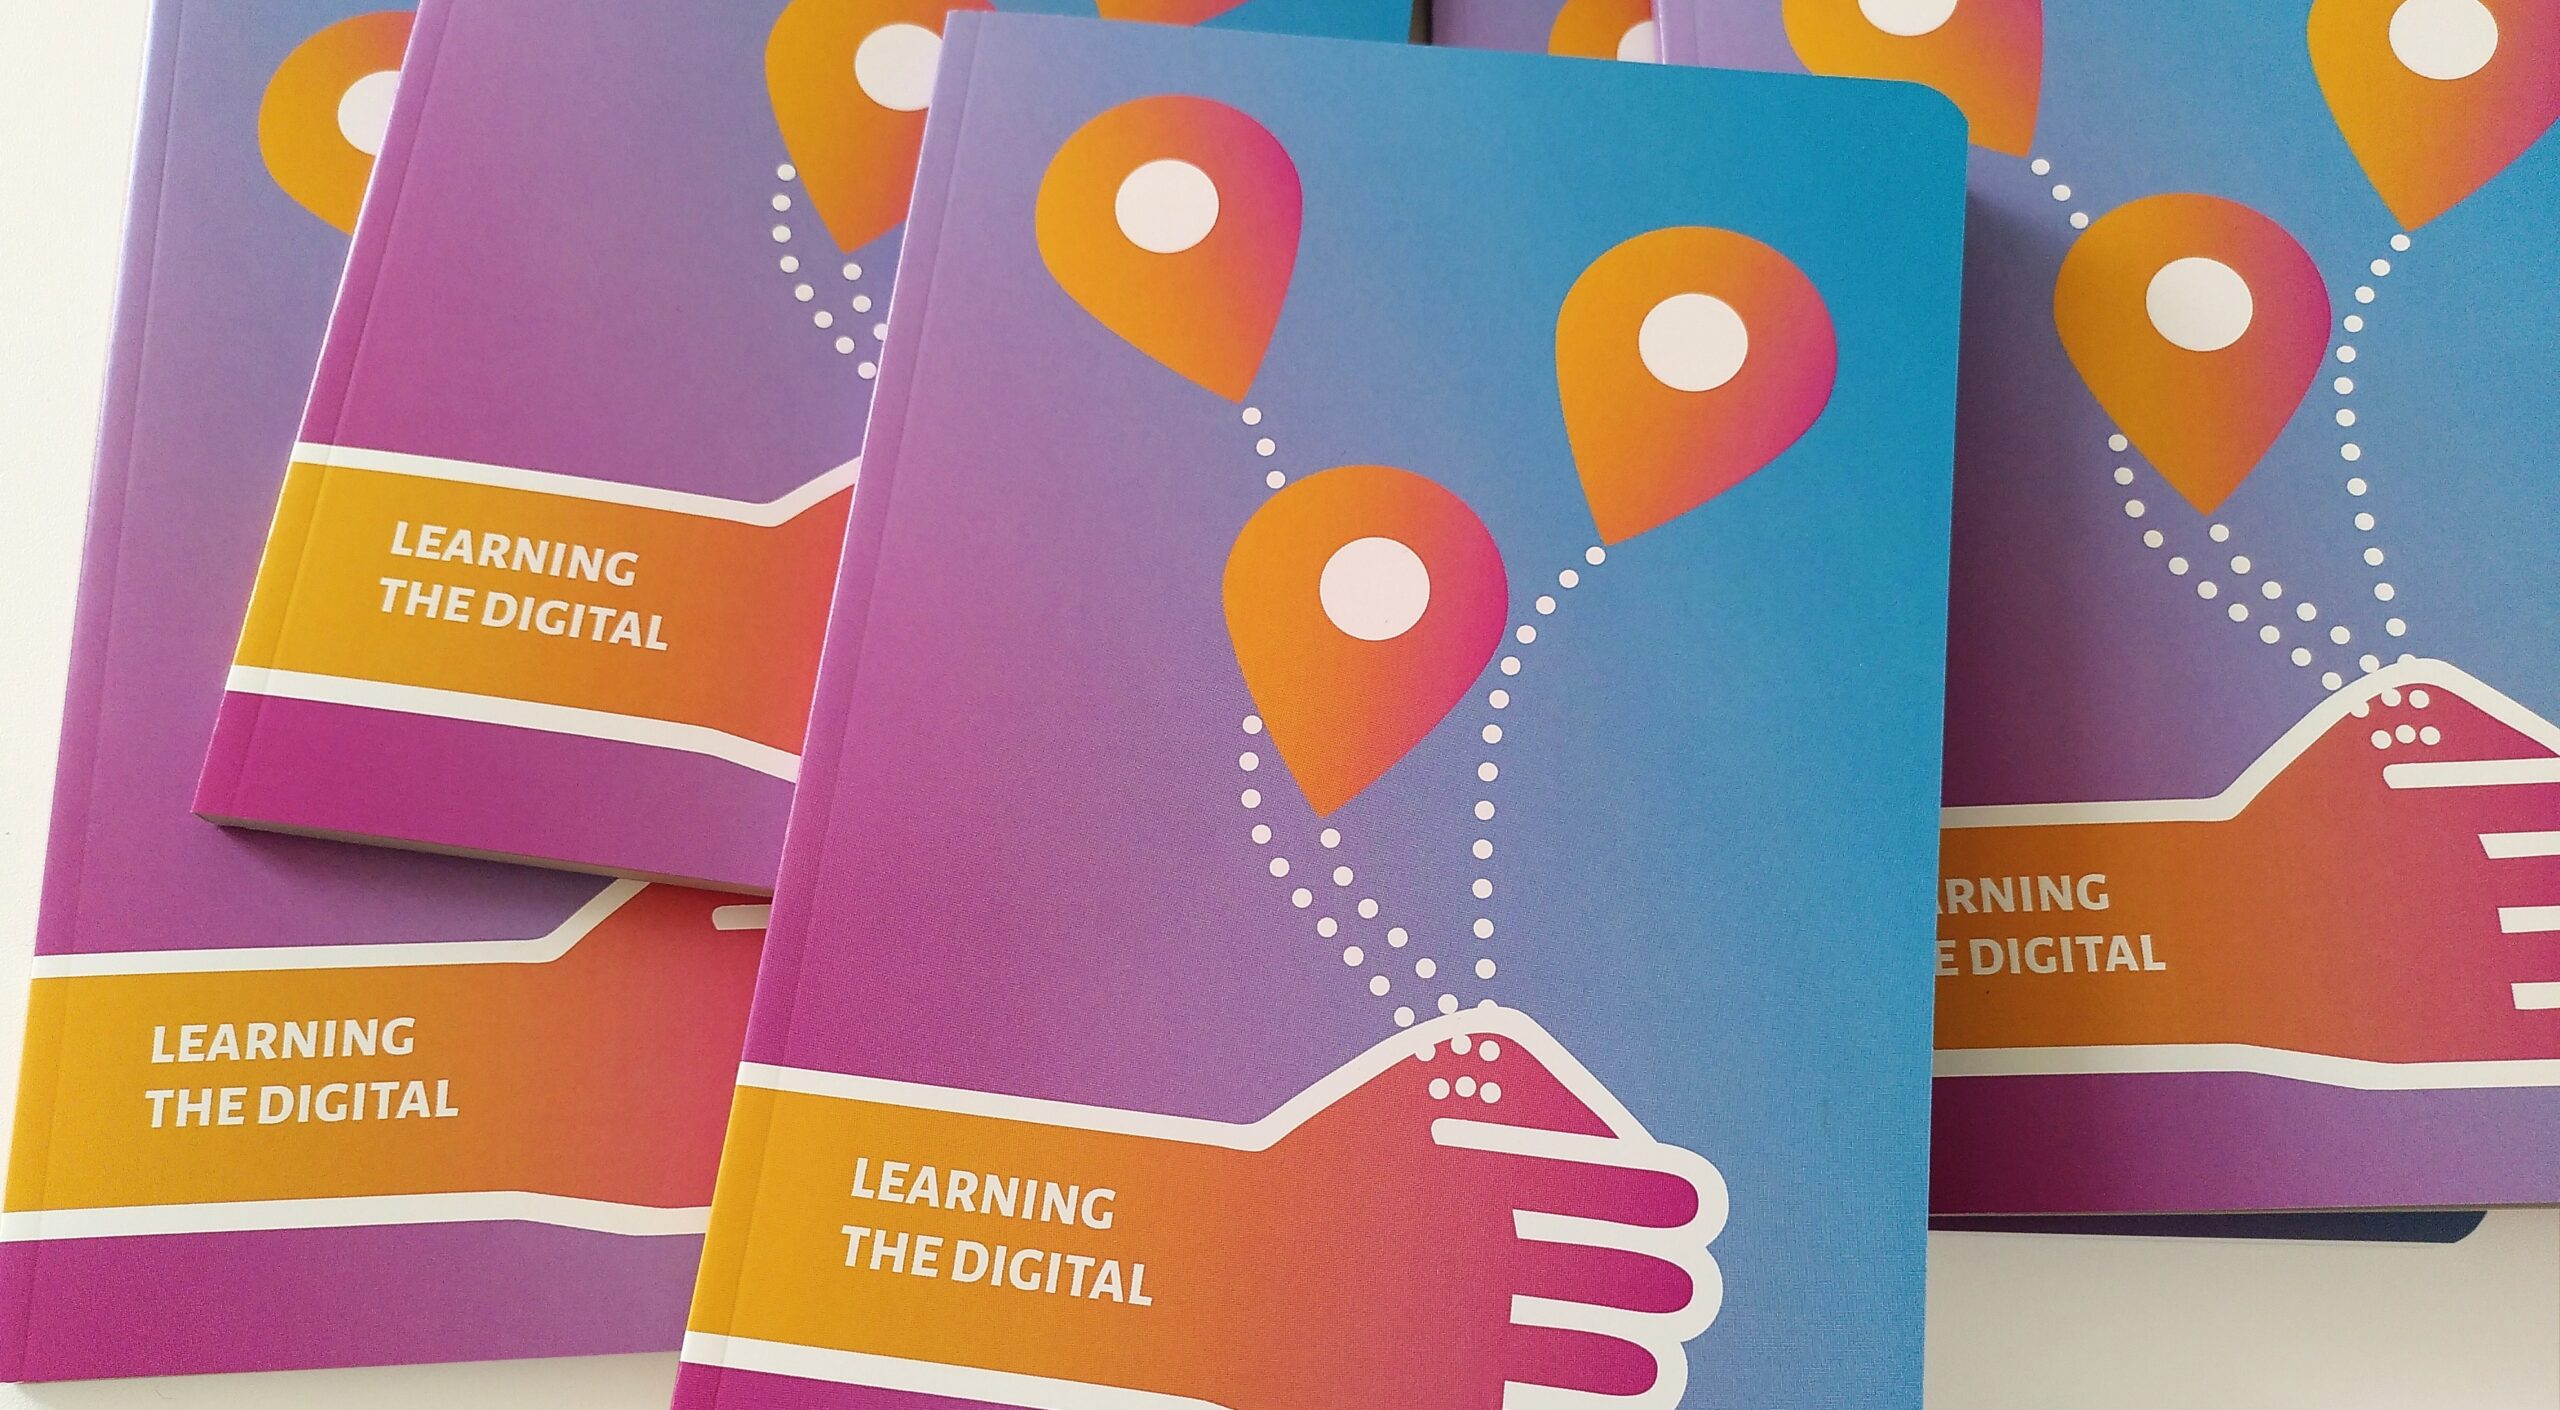 Event and Book Launch: Learning ‘the Digital’ 1st June, 2022 Brussels